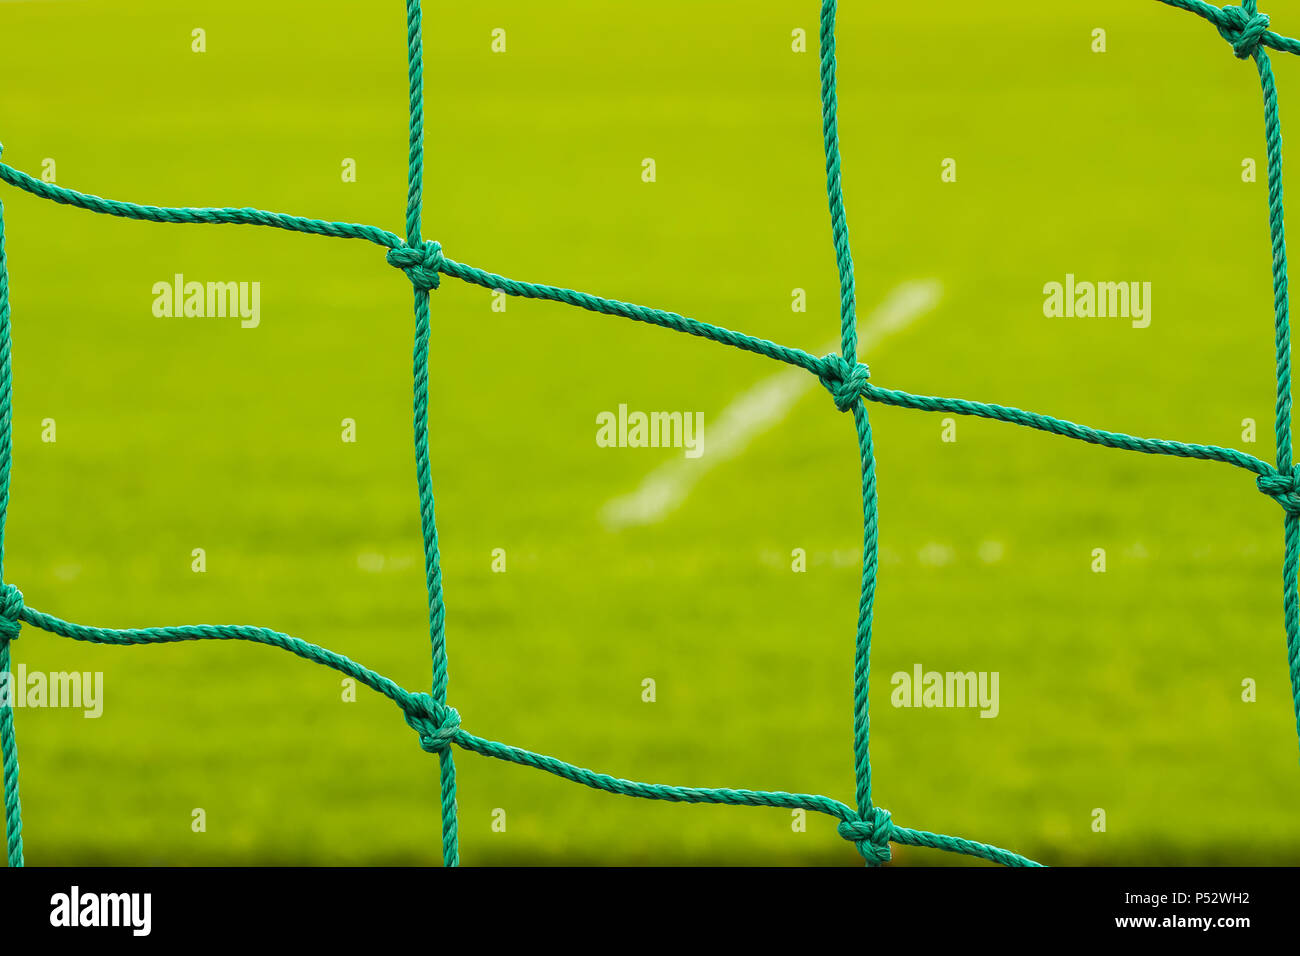 Soccer net on green grass close-up. Background Stock Photo